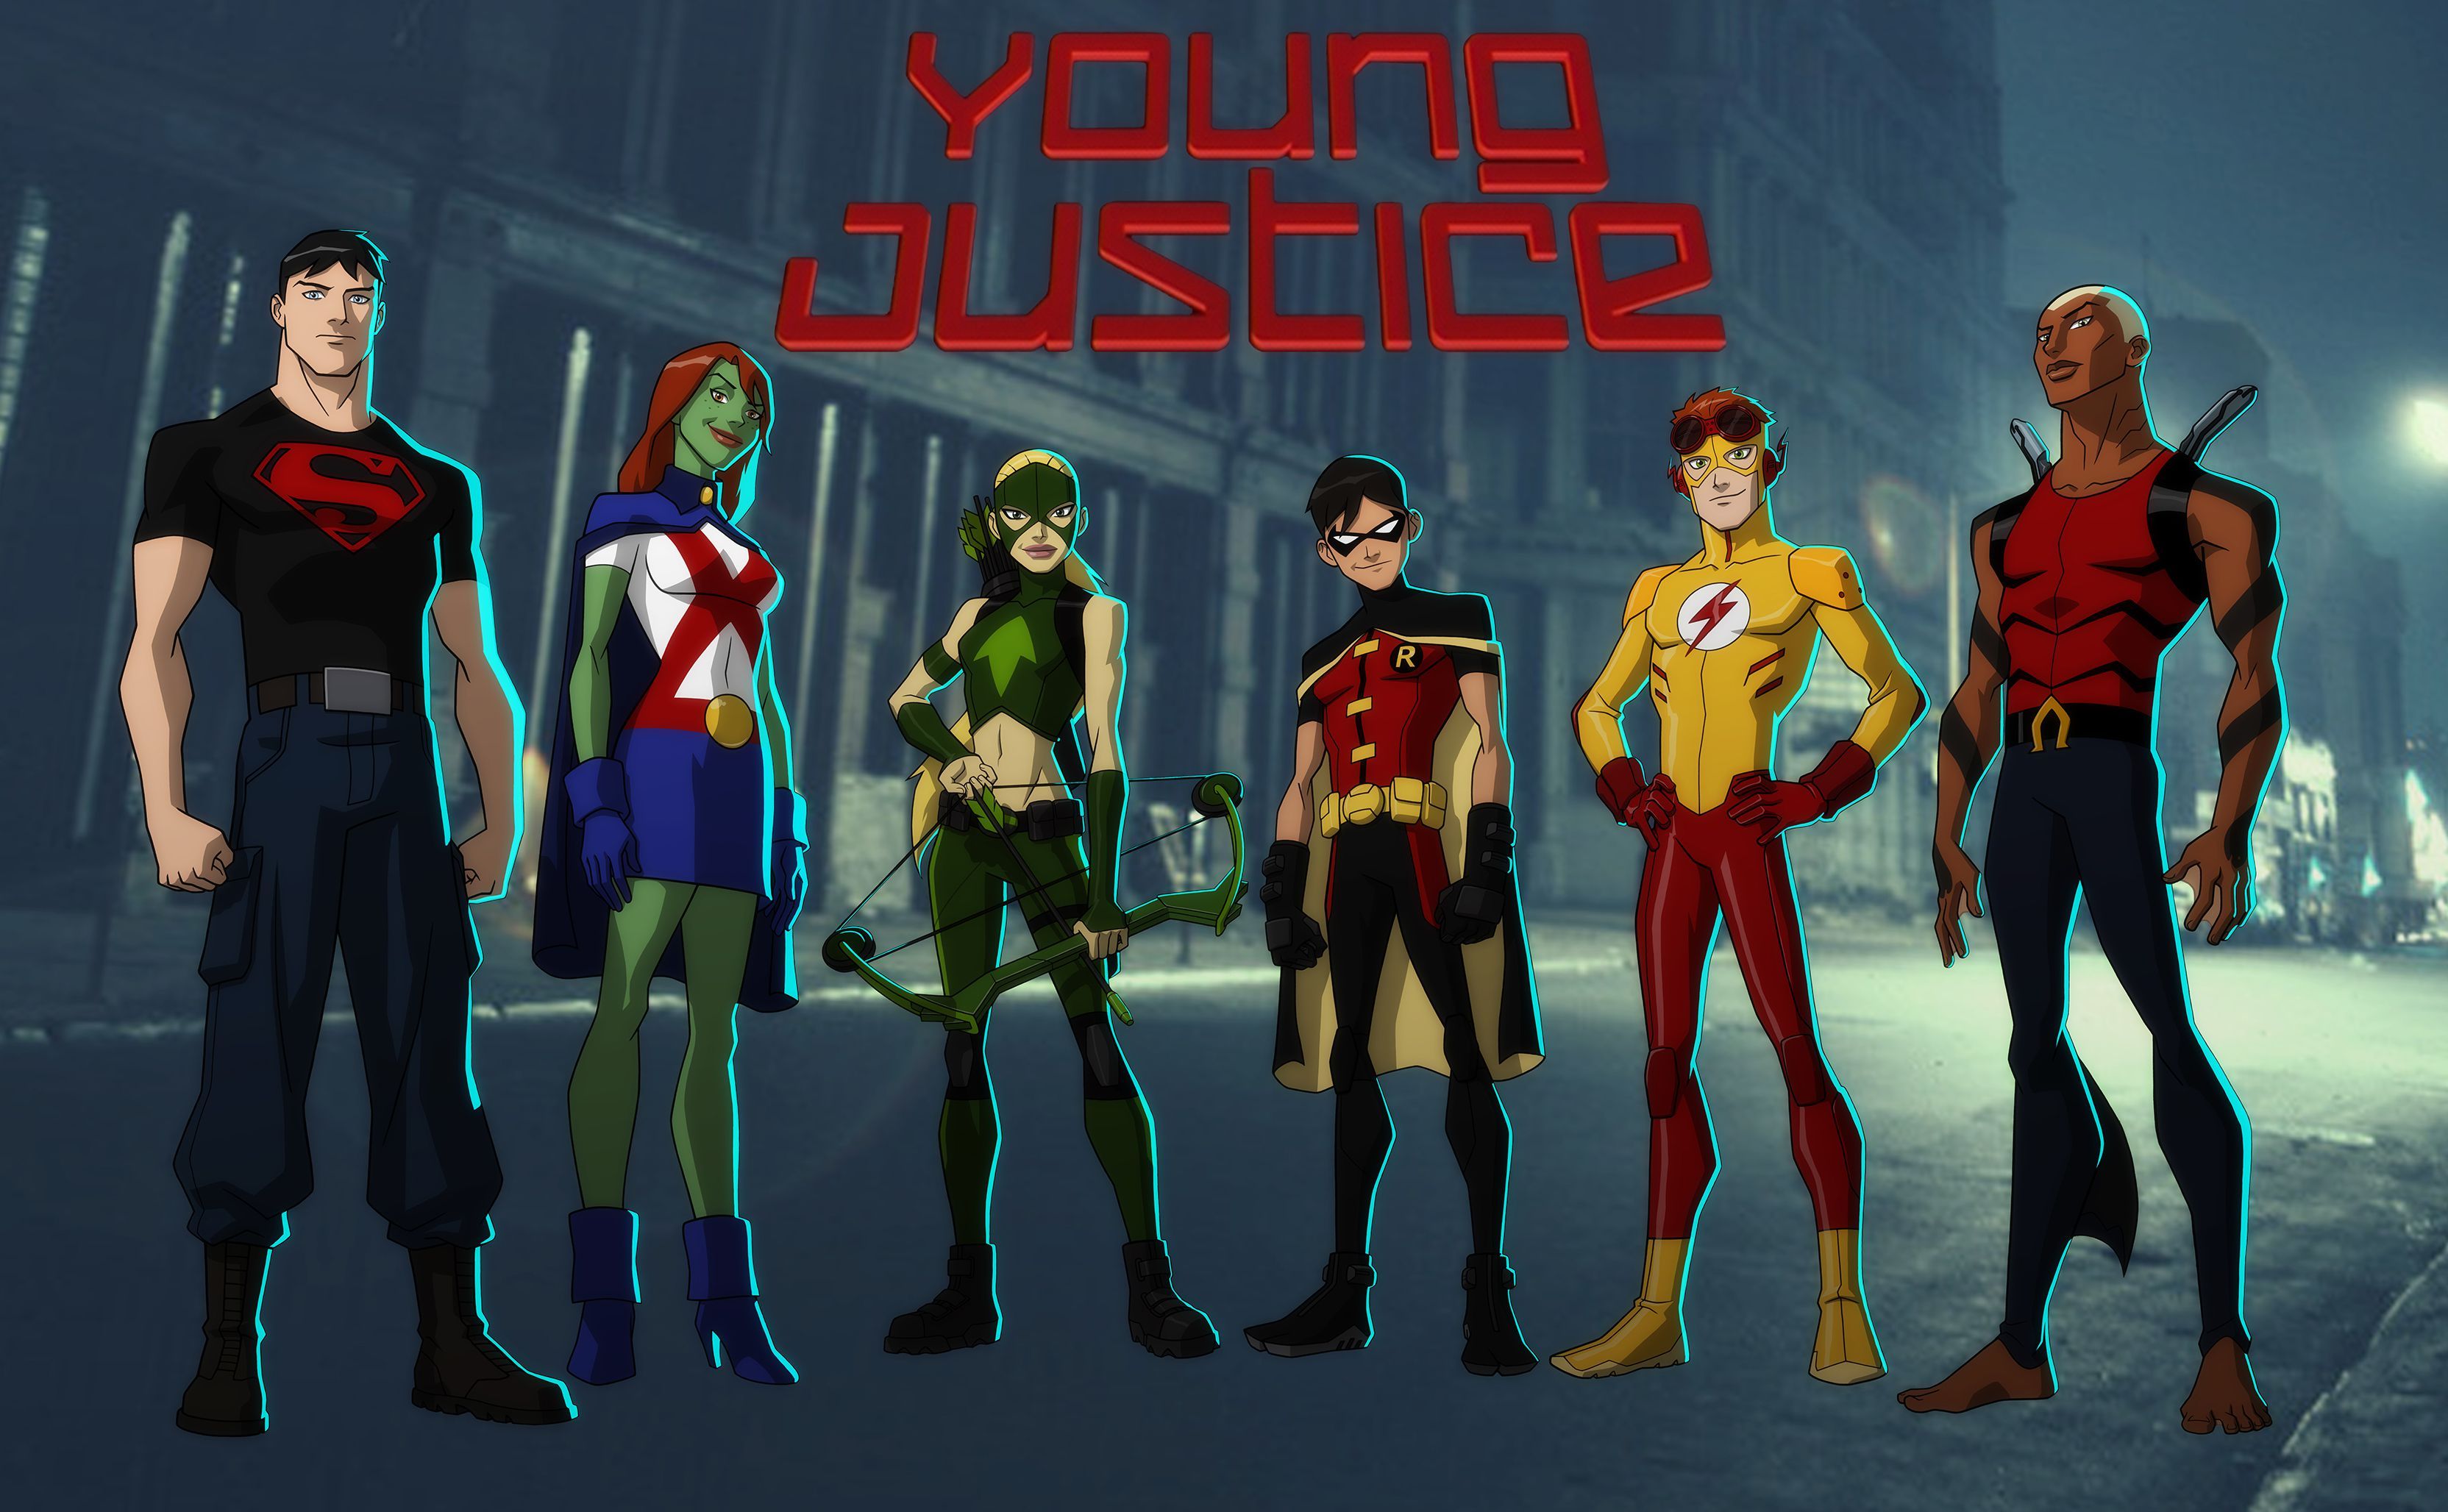 Young Justice Wallpaper. Justice League Wallpaper, Young Justice Wallpaper and Justice Society Wallpaper